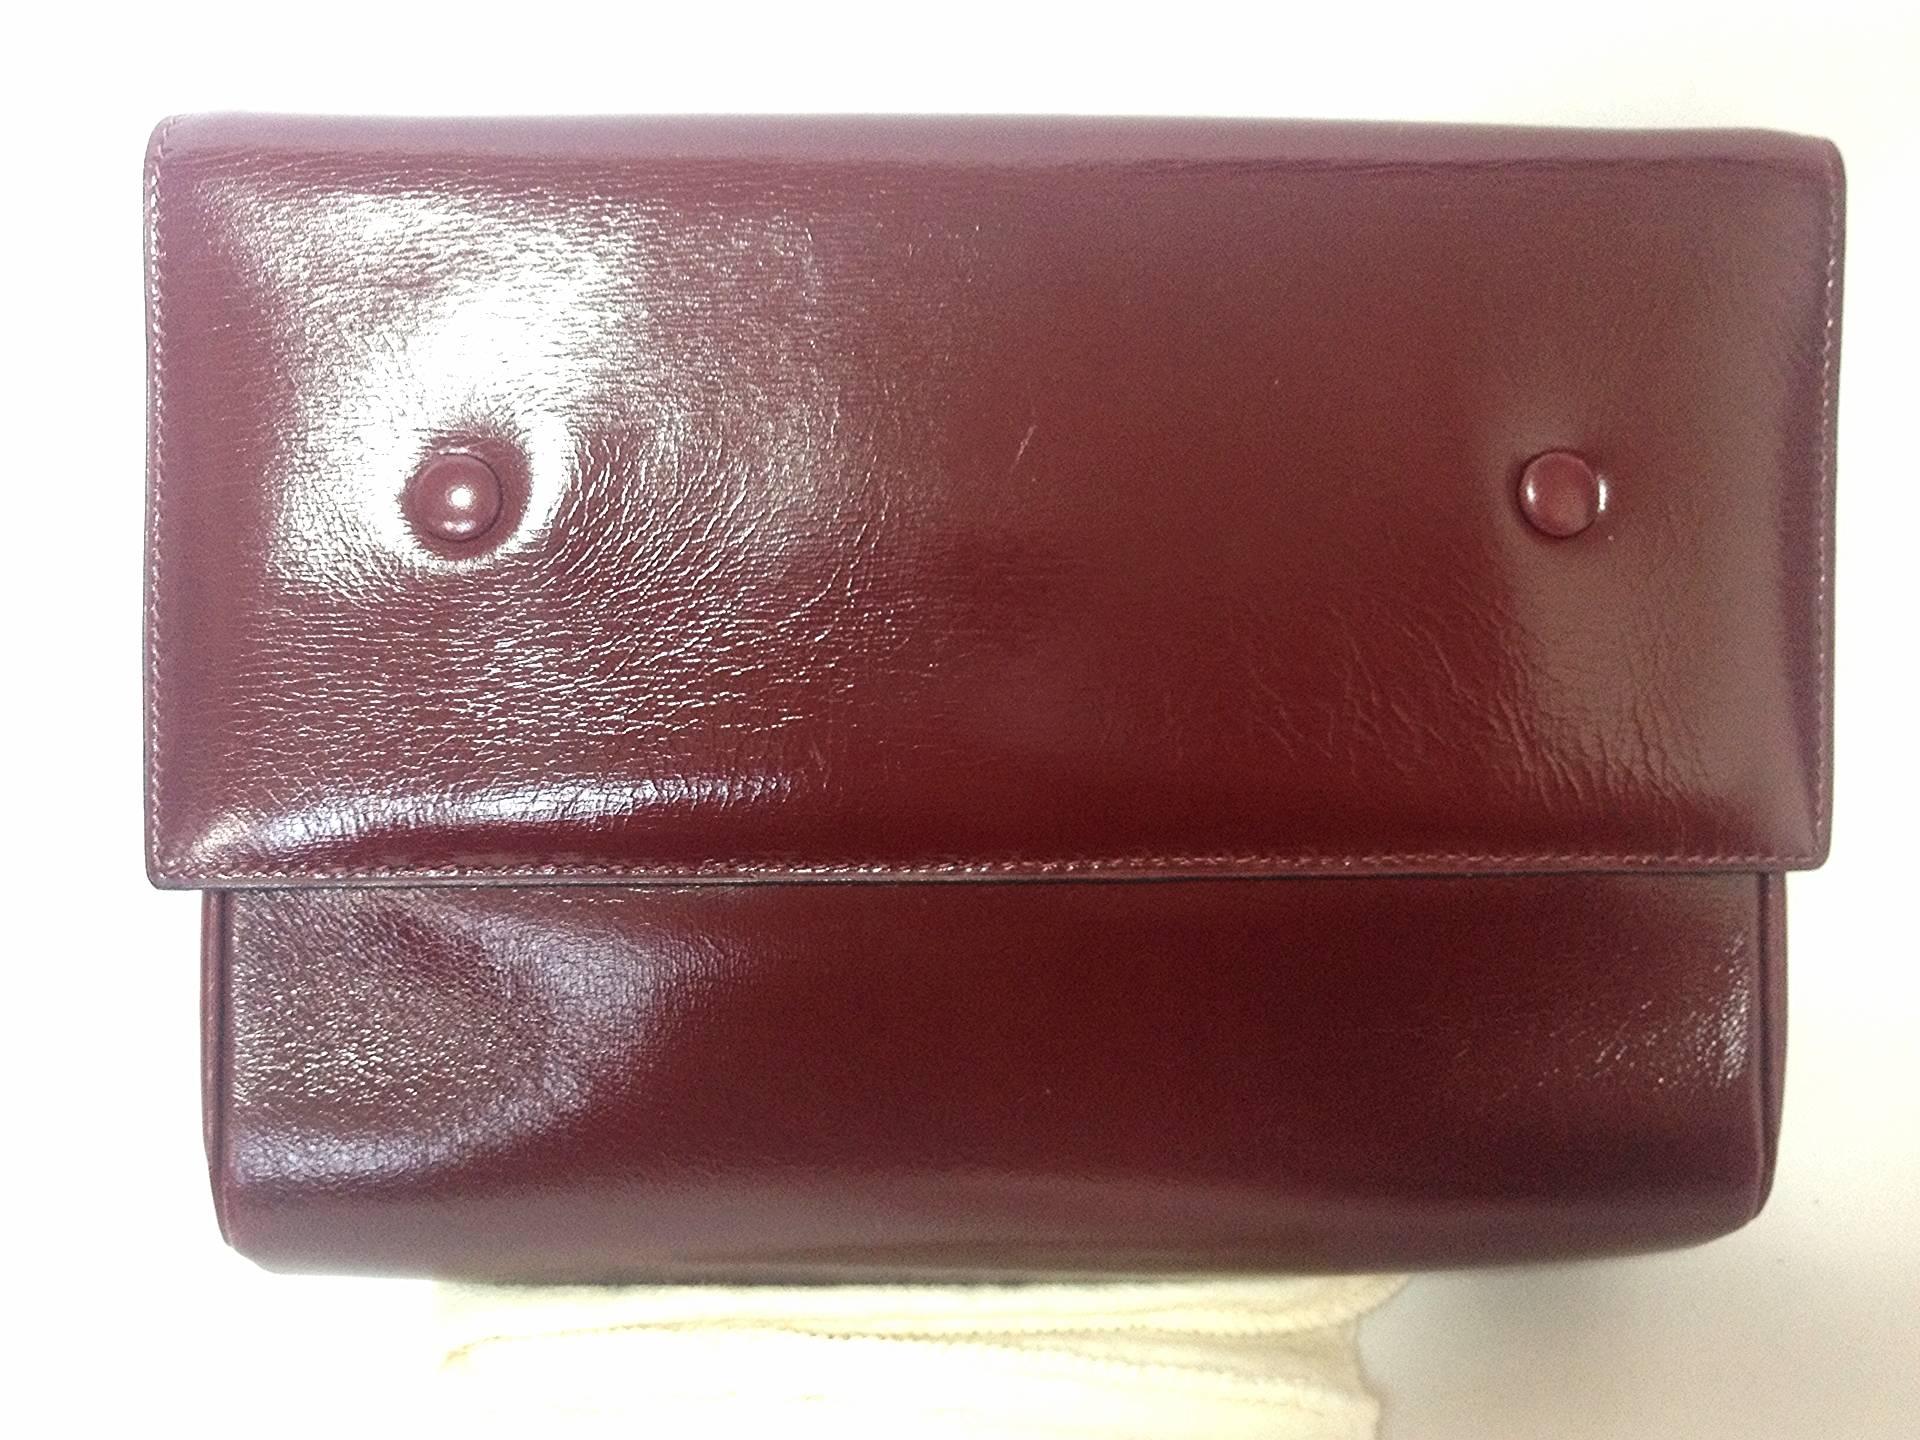 Vintage CELINE genuine wine brown leather clutch bag with golden carriage logo closure. Must-have purse from Celine.

Introducing a vintage masterpiece from CELINE, a wine brown genuine leather purse with golden logo closure. 

The shoulder